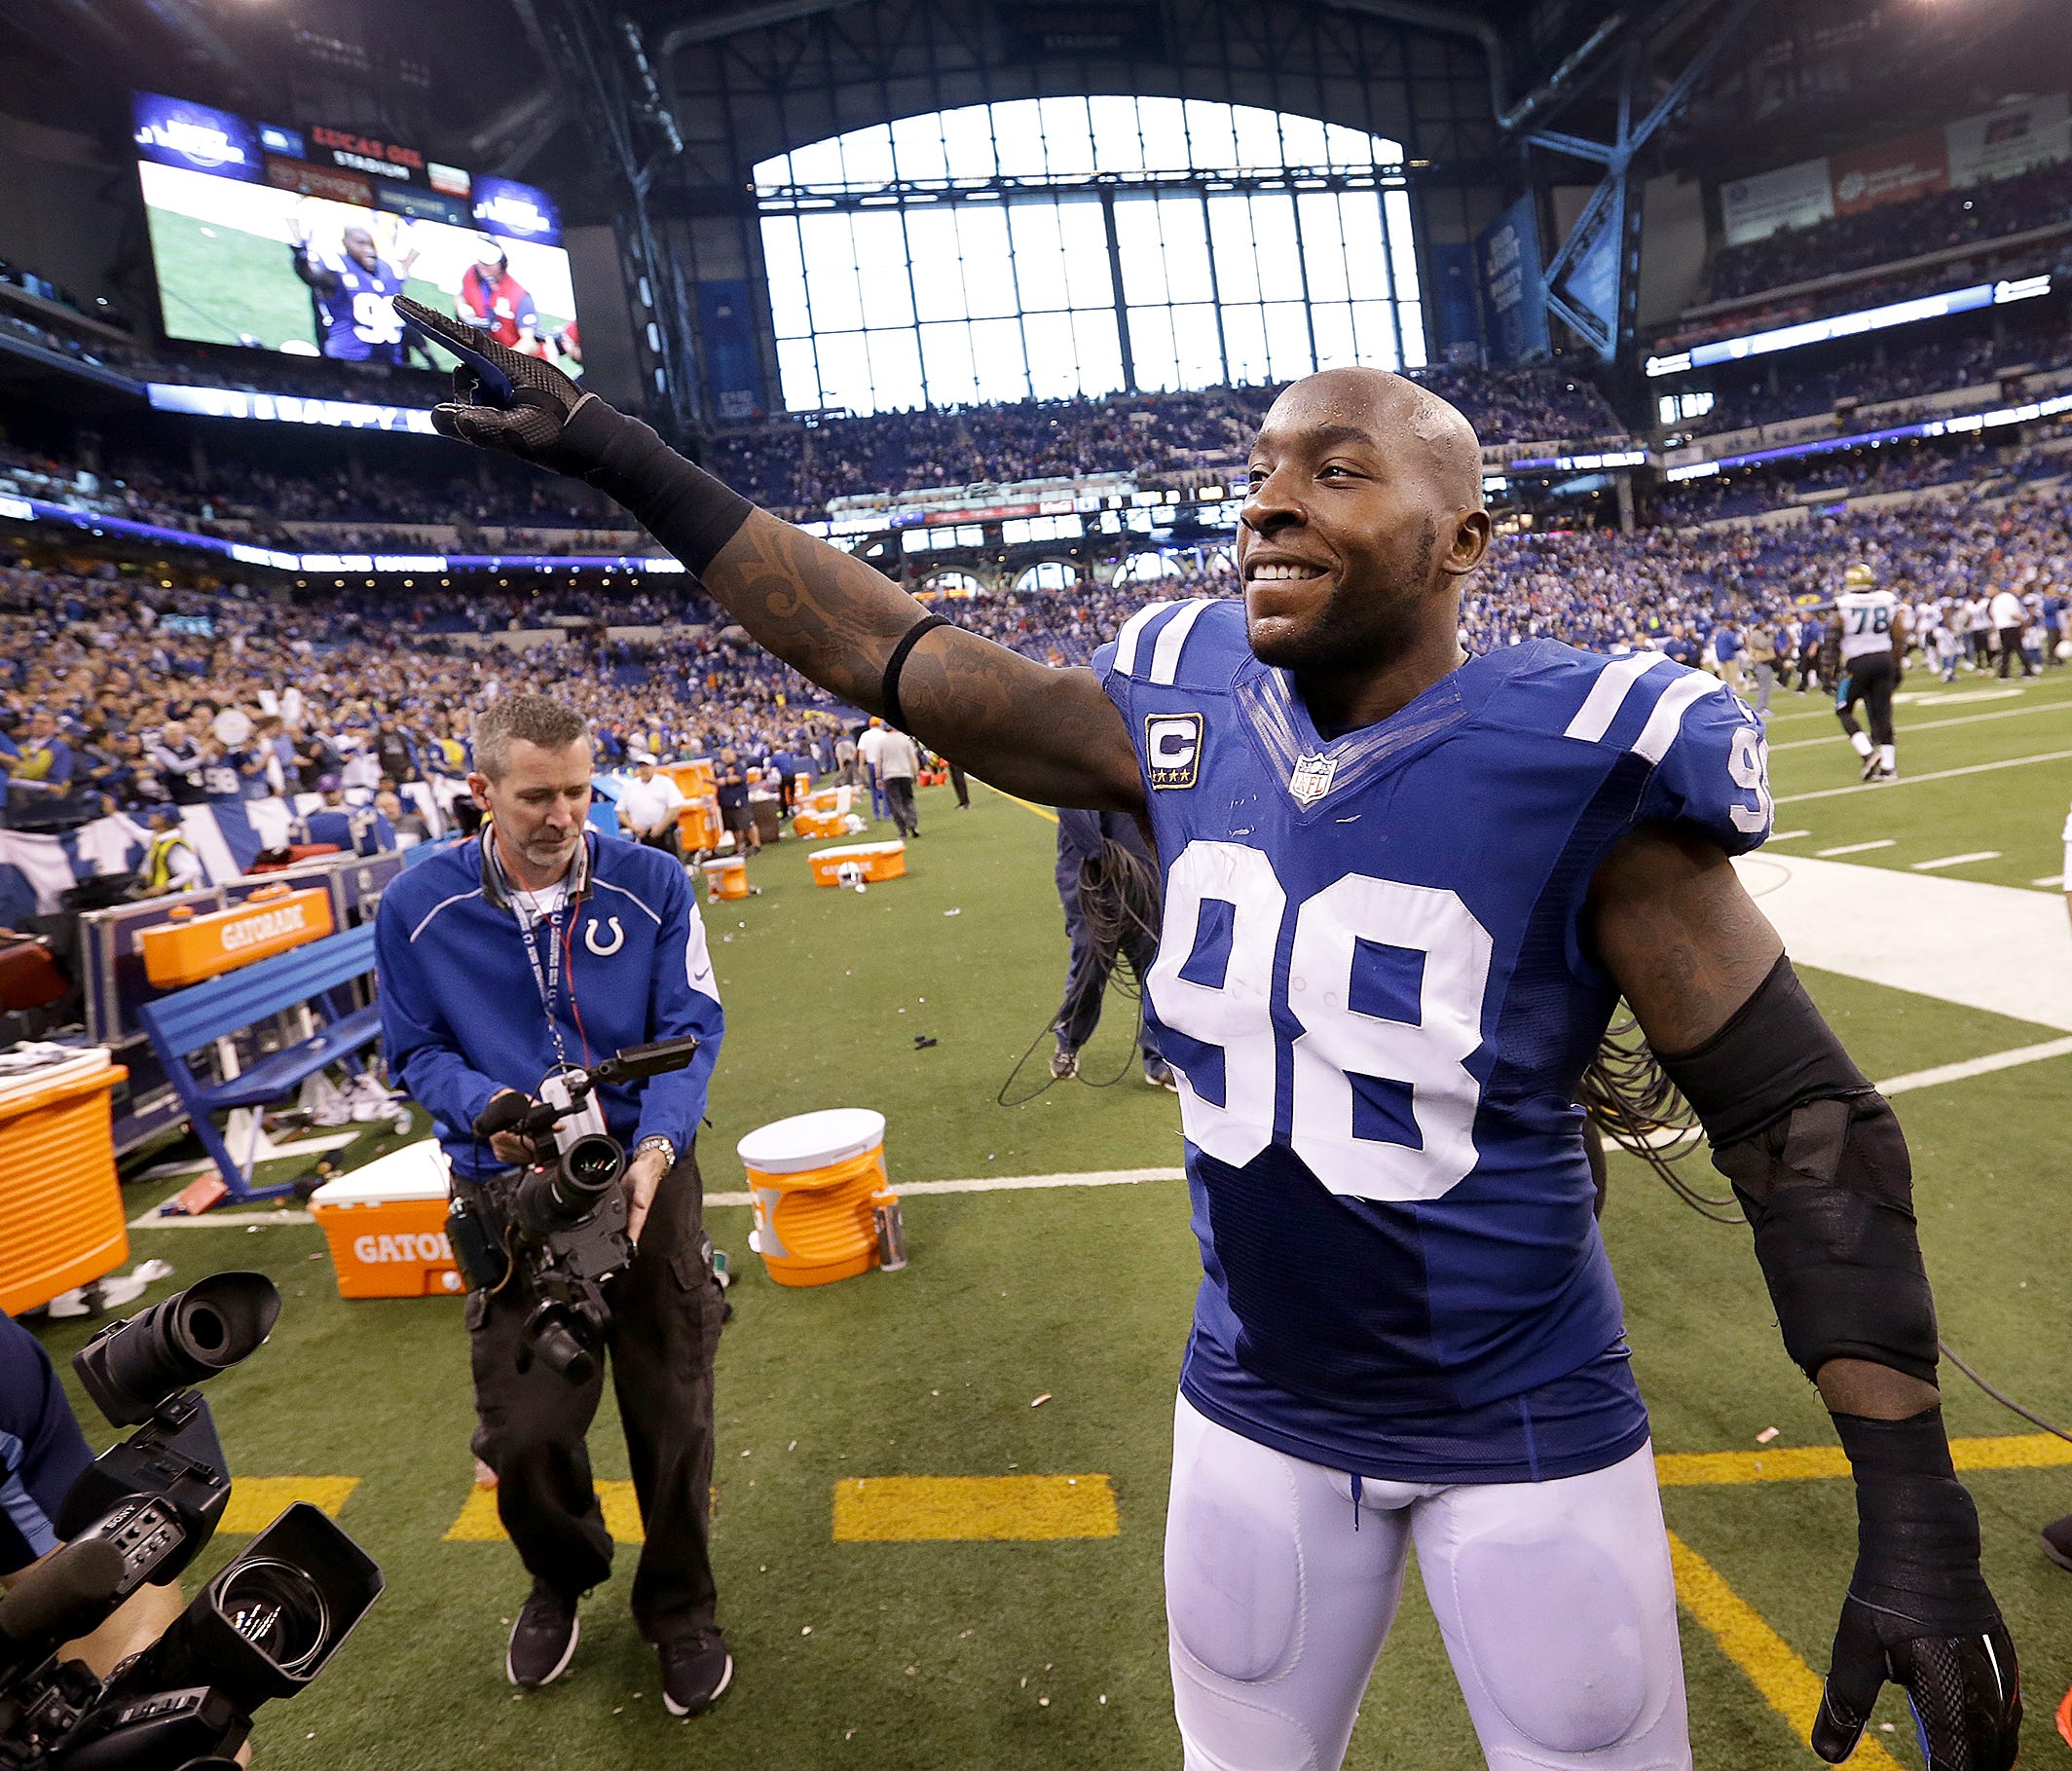 Indianapolis Colts outside linebacker Robert Mathis (98) says his goodbyes to the Colts fans following their NFL football game Sunday, Jan.1, 2016, at Lucas Oil Stadium. Mathis was arrested Tuesday on a DUI charge.